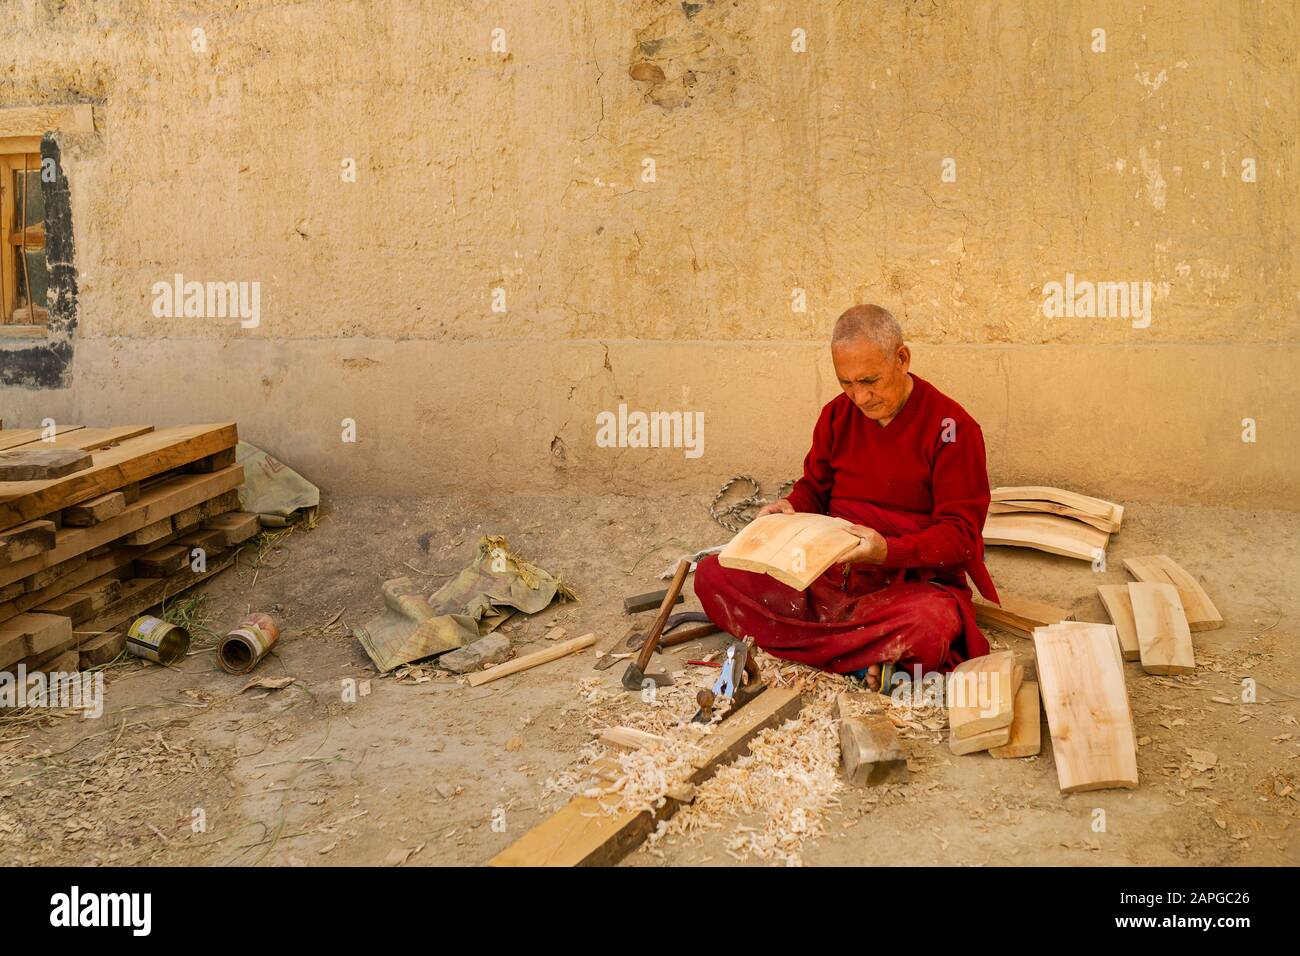 Buddhist monk sitting and making wooden barrel with metal tools at monastery in Kaza, Himachal Pradesh, India. Stock Photo